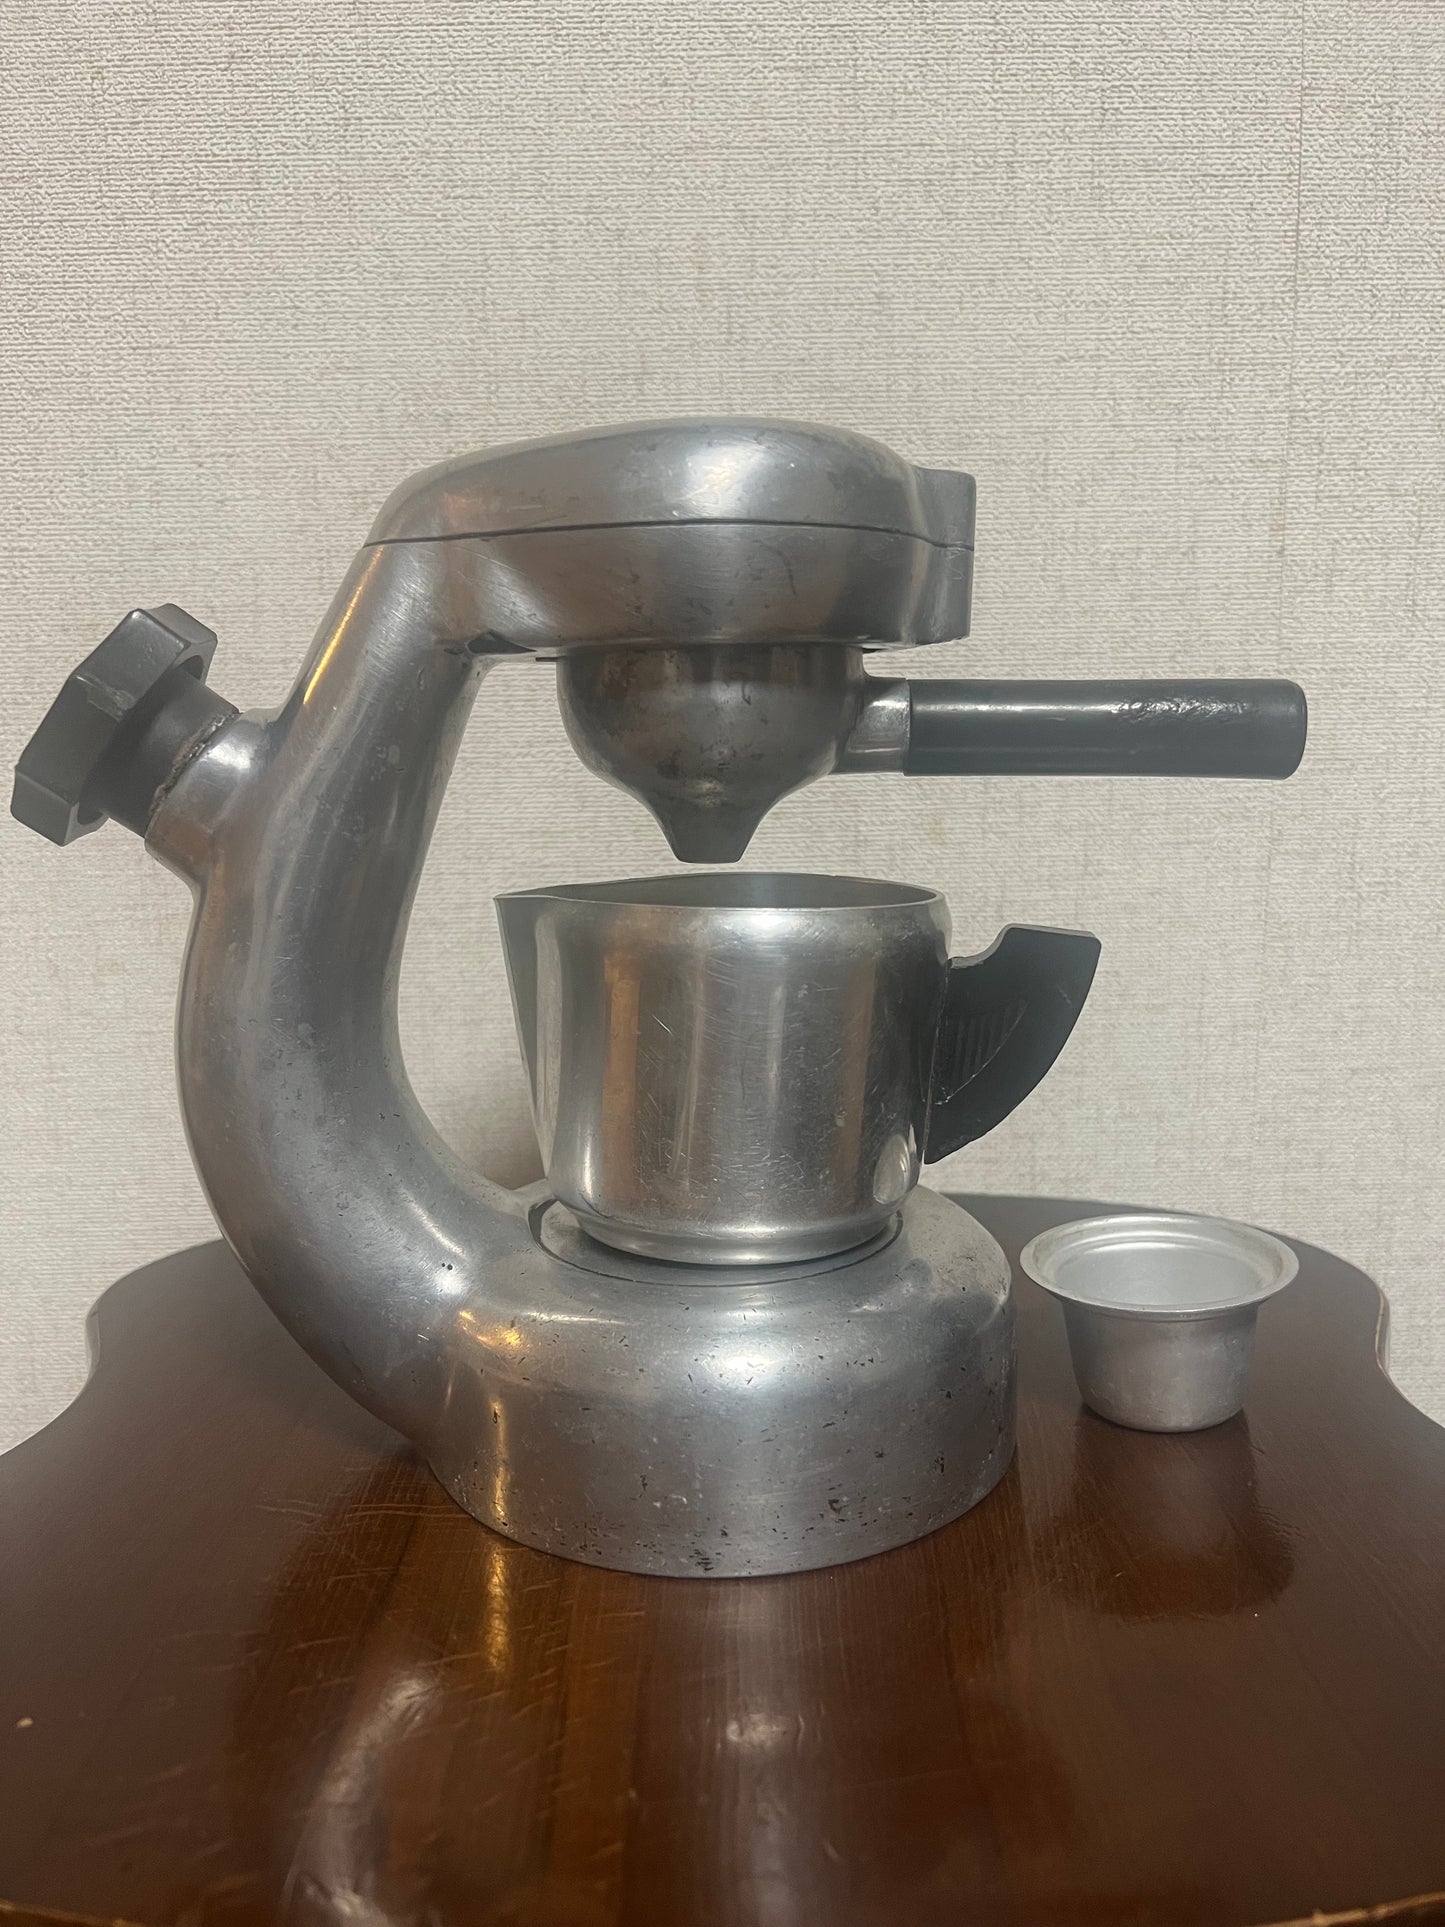 ☆ATOMIC Coffee Maker vintage made in ハンガリー エスプレッソ ...